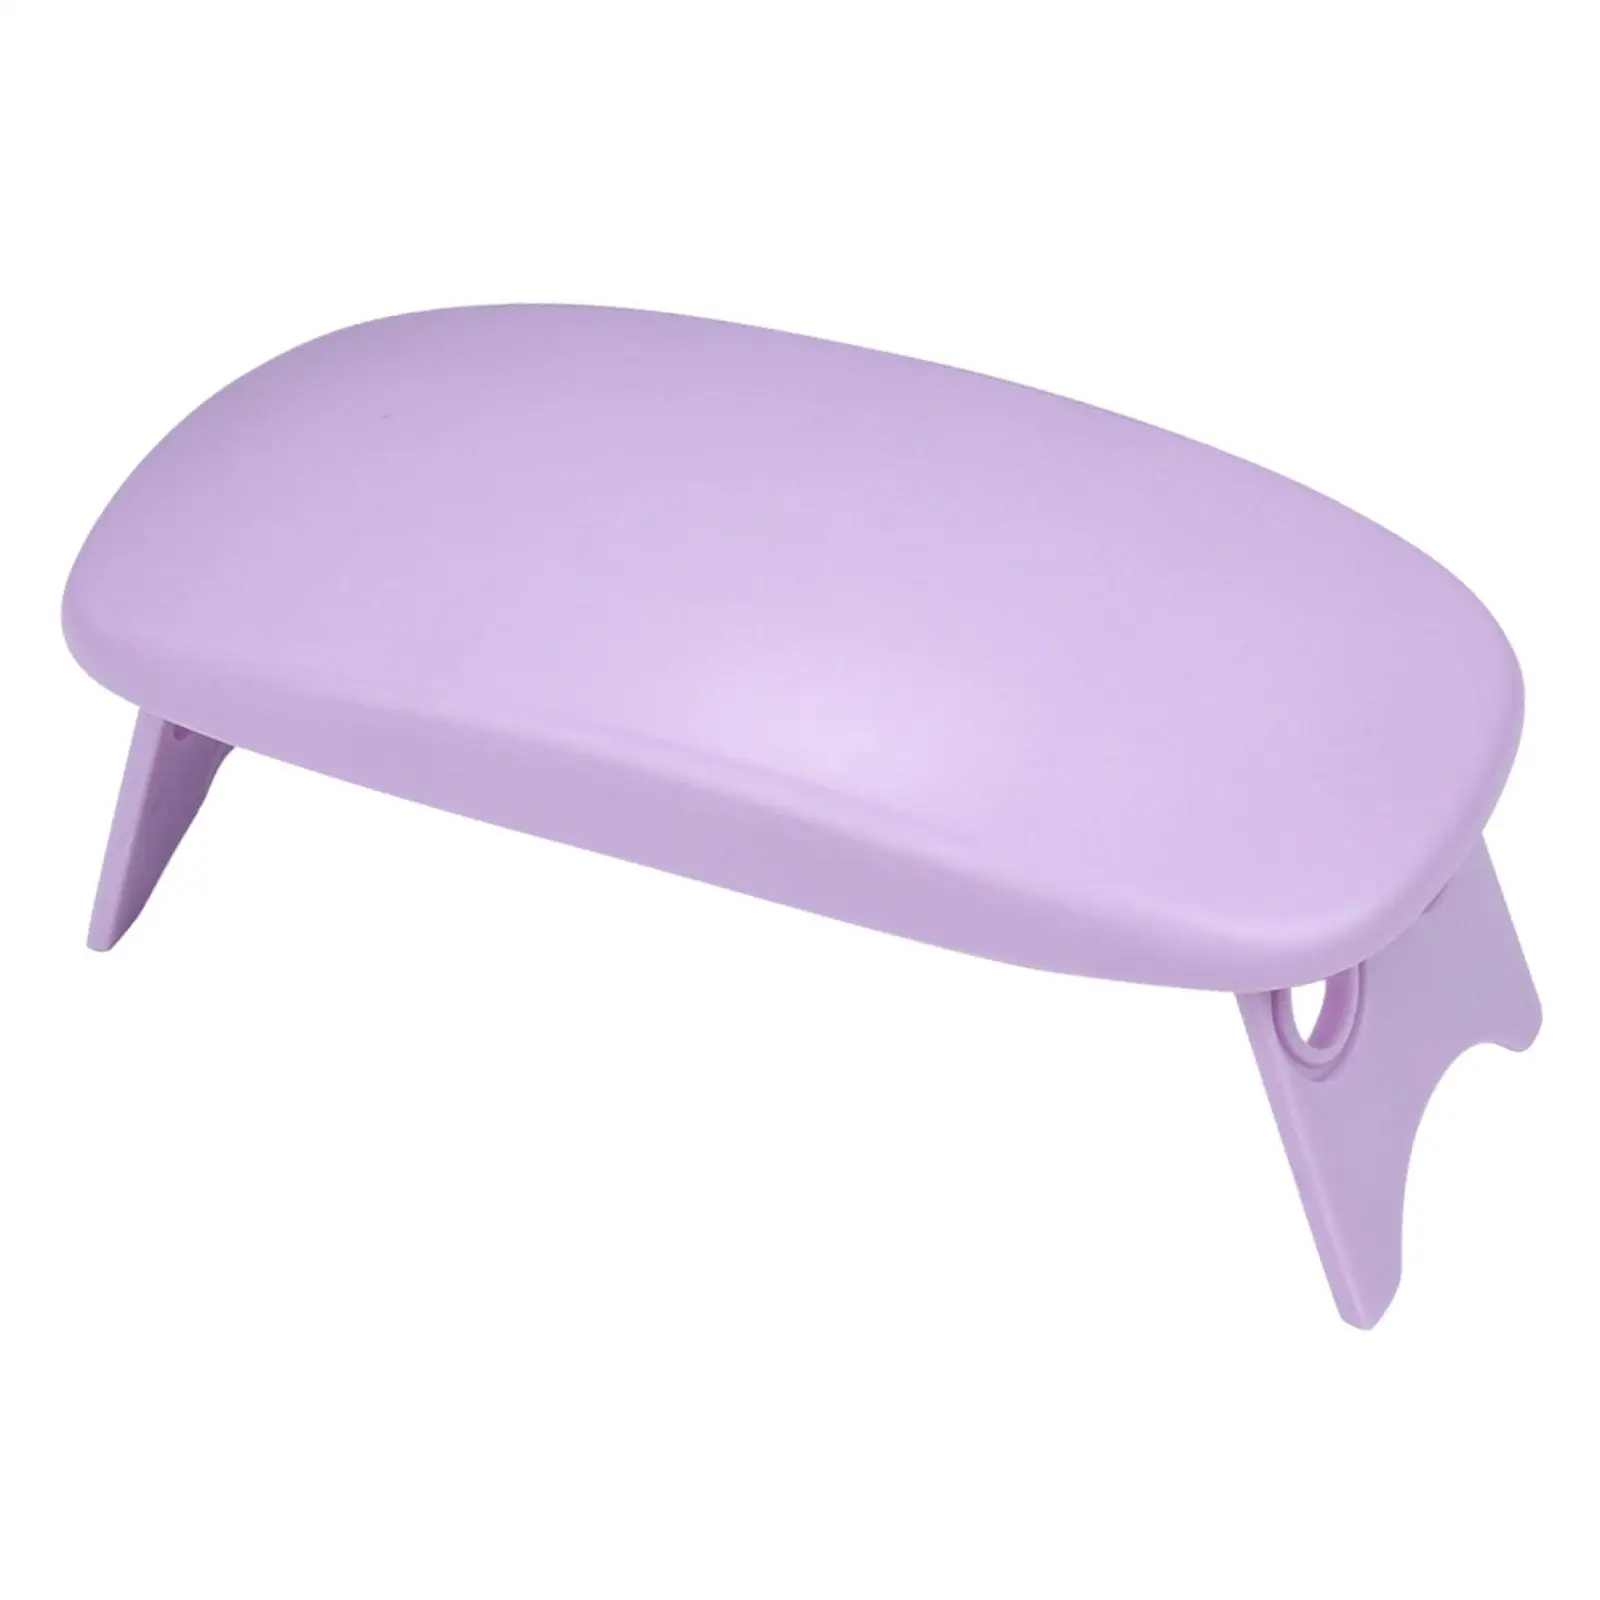 Nail Arm Rest, Folding Non Slip Comfortable Arm Rest Nail Table Manicure Hand Cushion for Salons, Valentine, DIY Birthday